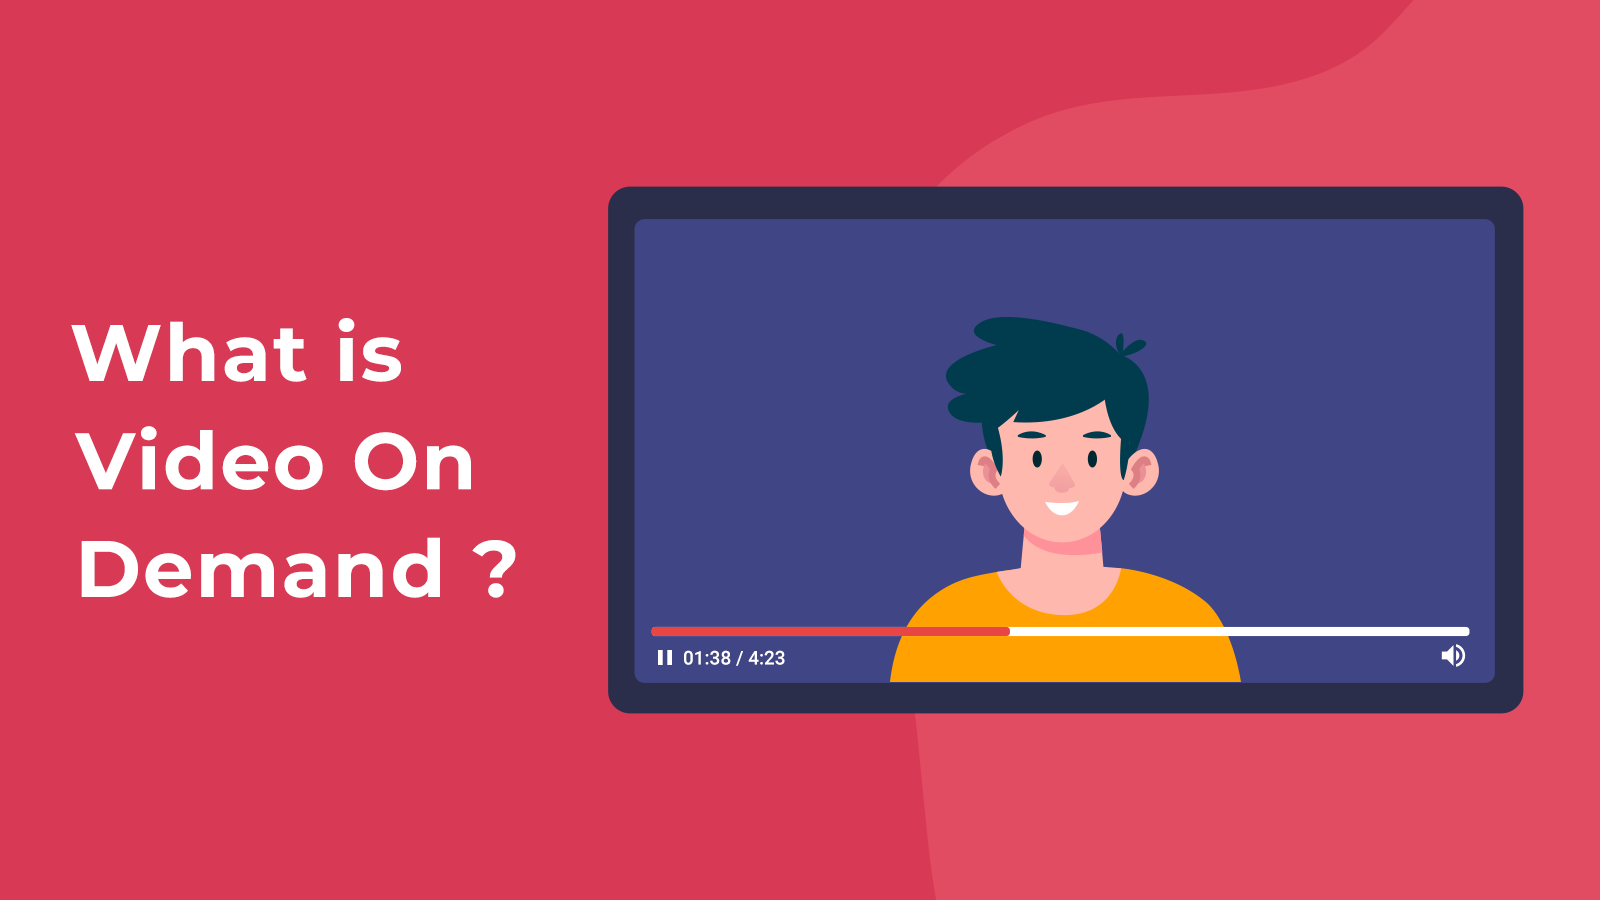 What is Video on Demand?